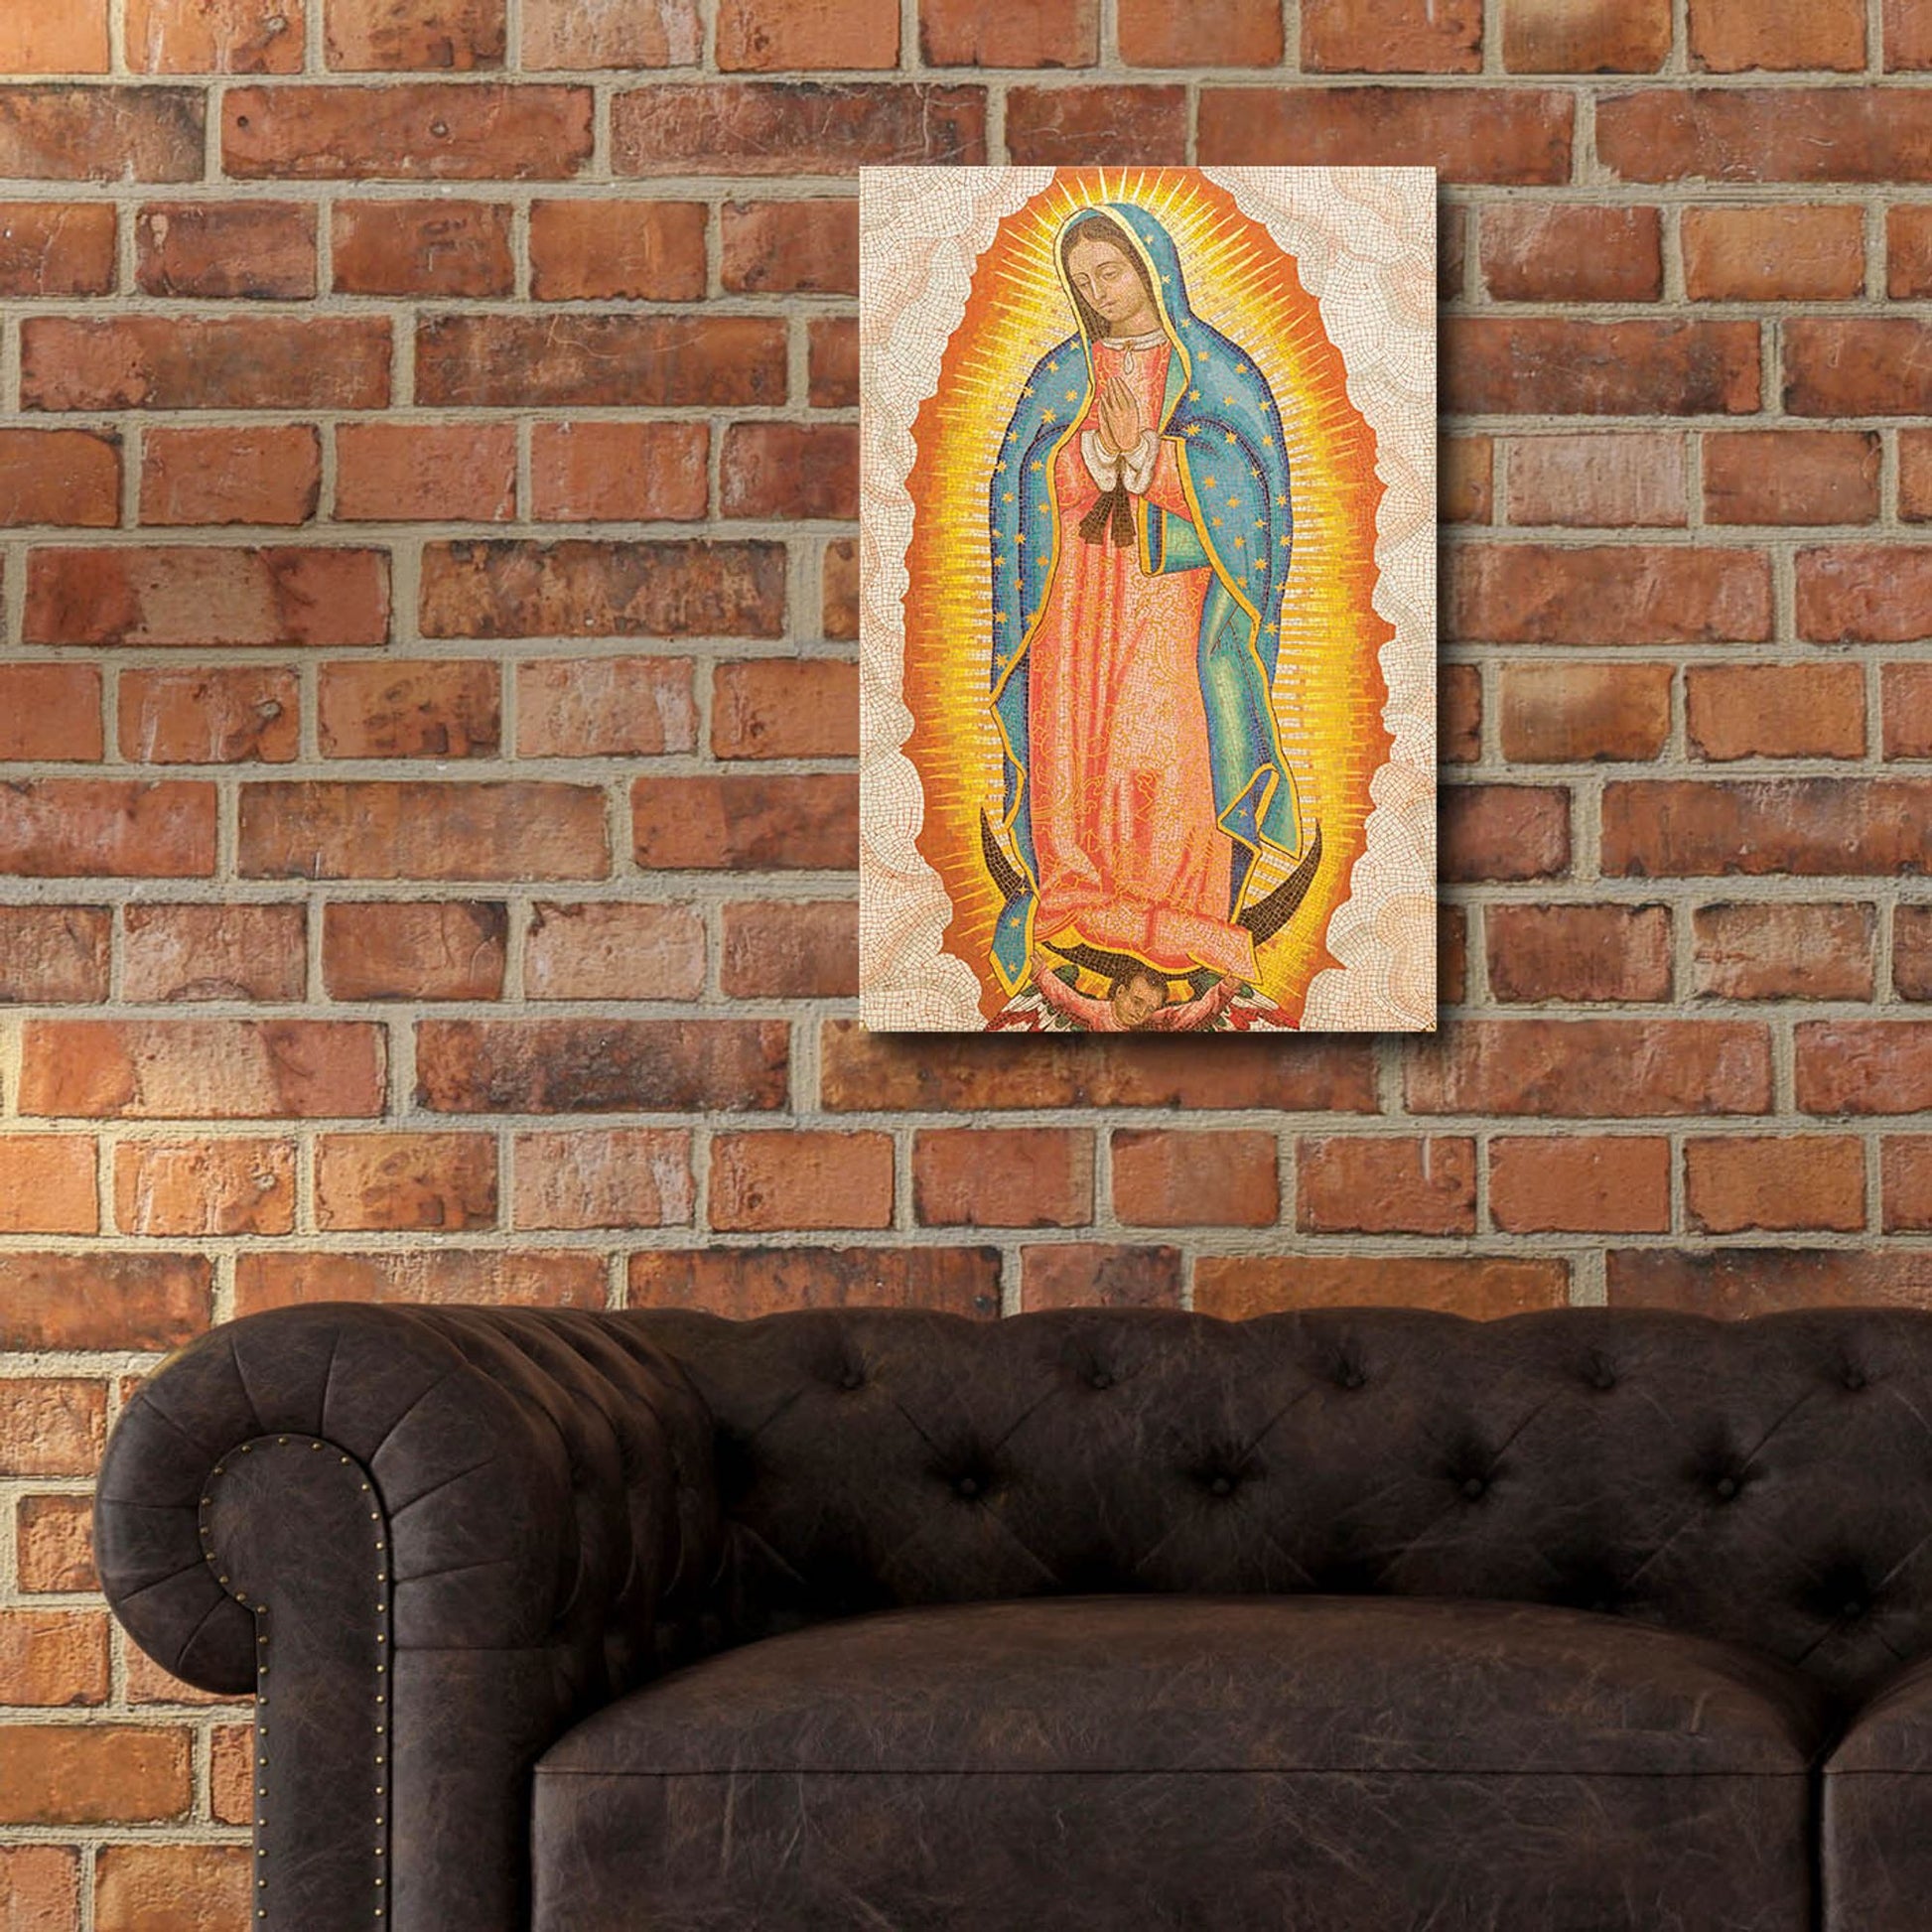 Epic Art 'Our Lady of Guadalupe' by Epic Portfolio, Acrylic Glass Wall Art,16x24